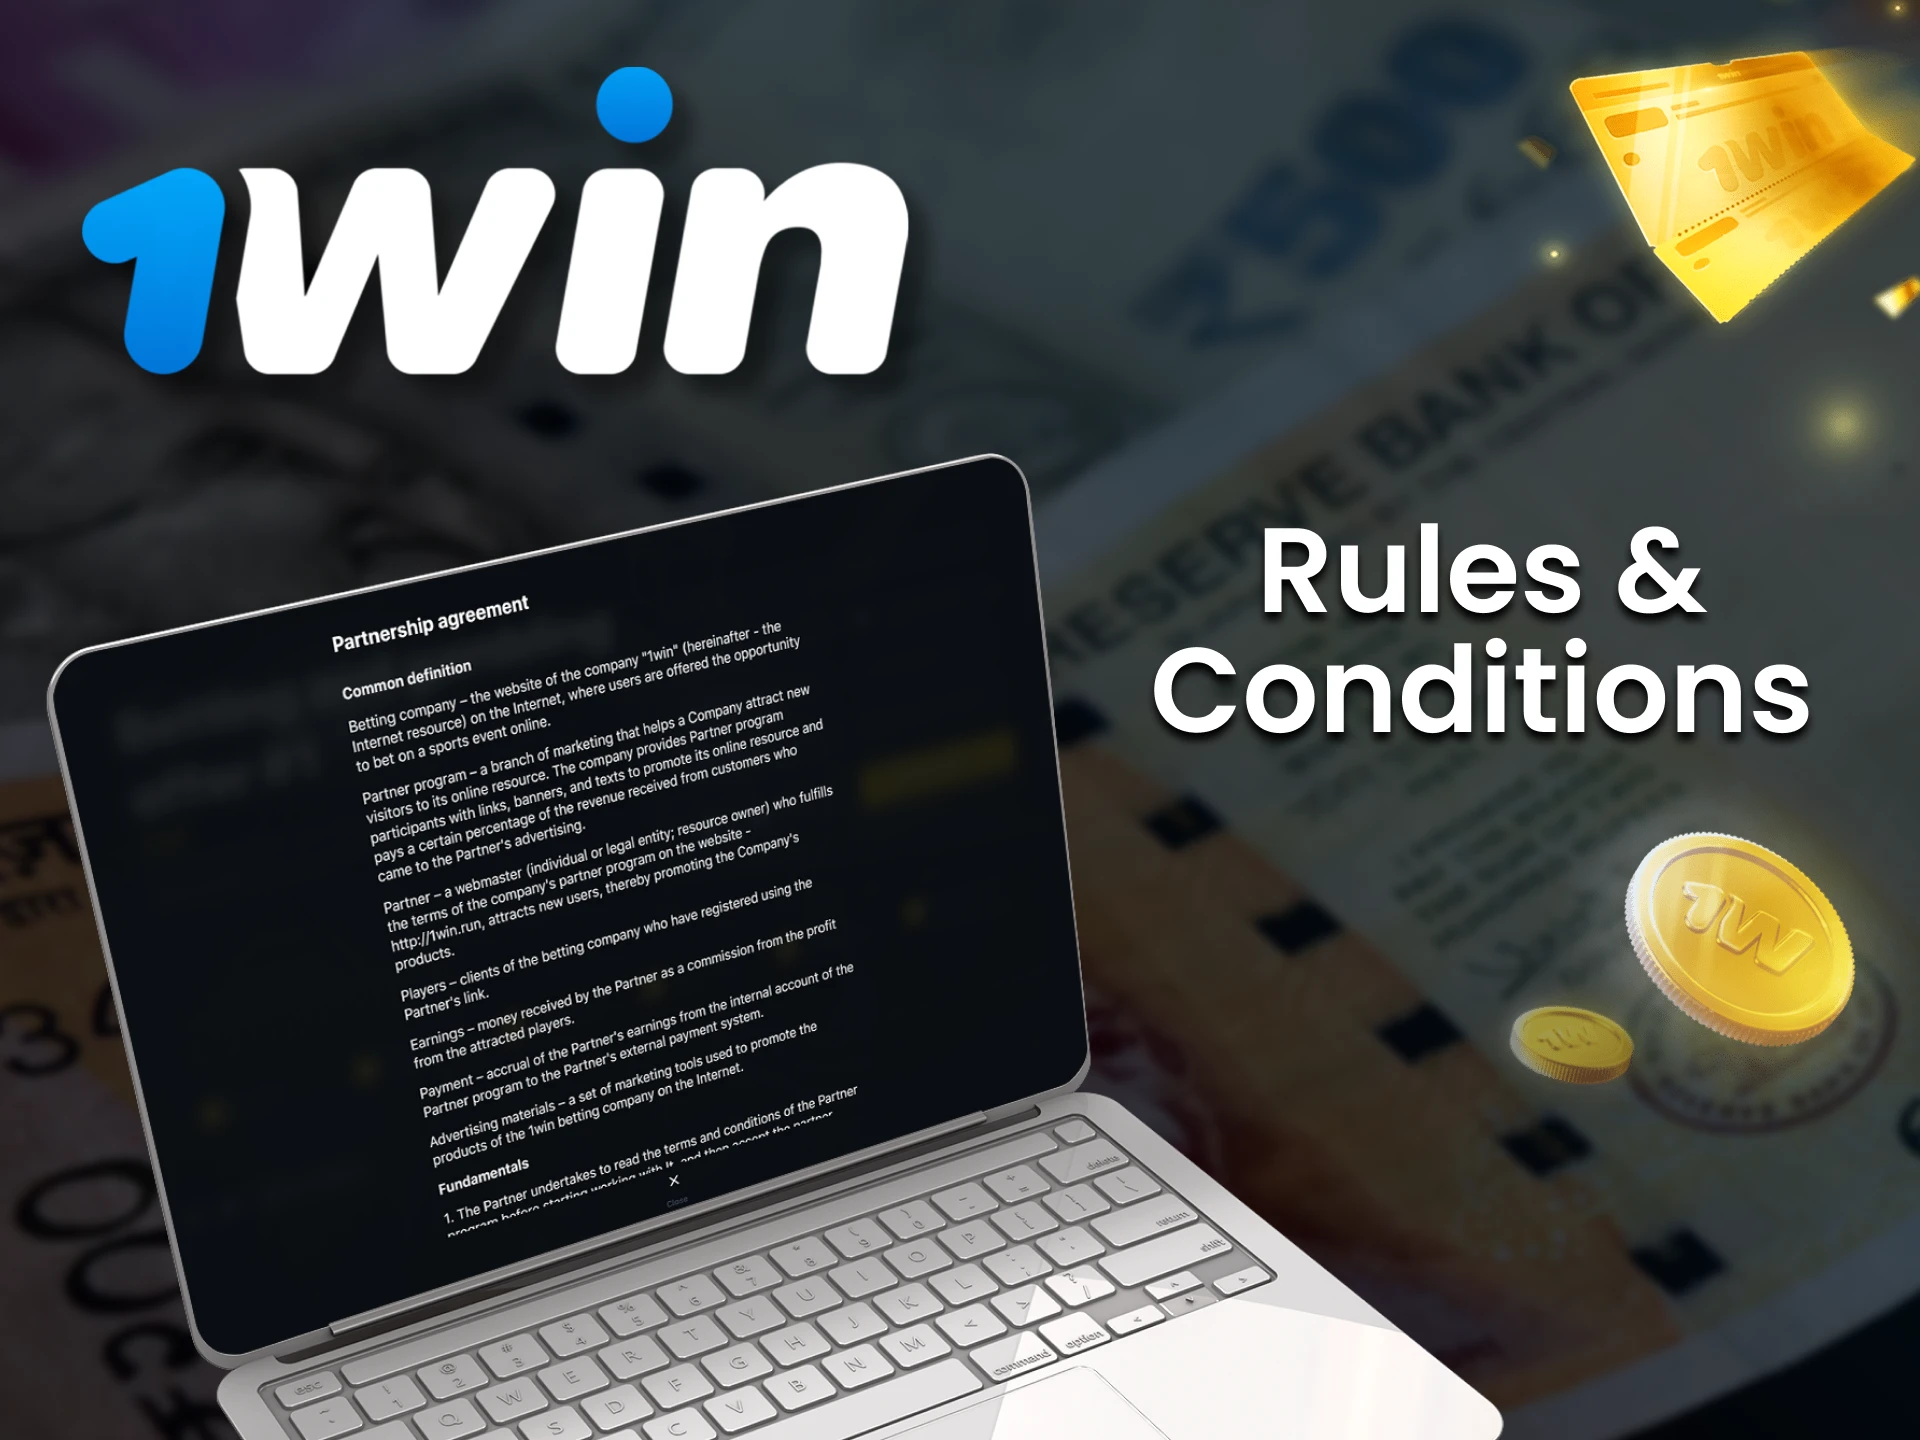 Learn the rules of the affiliate program from 1win.